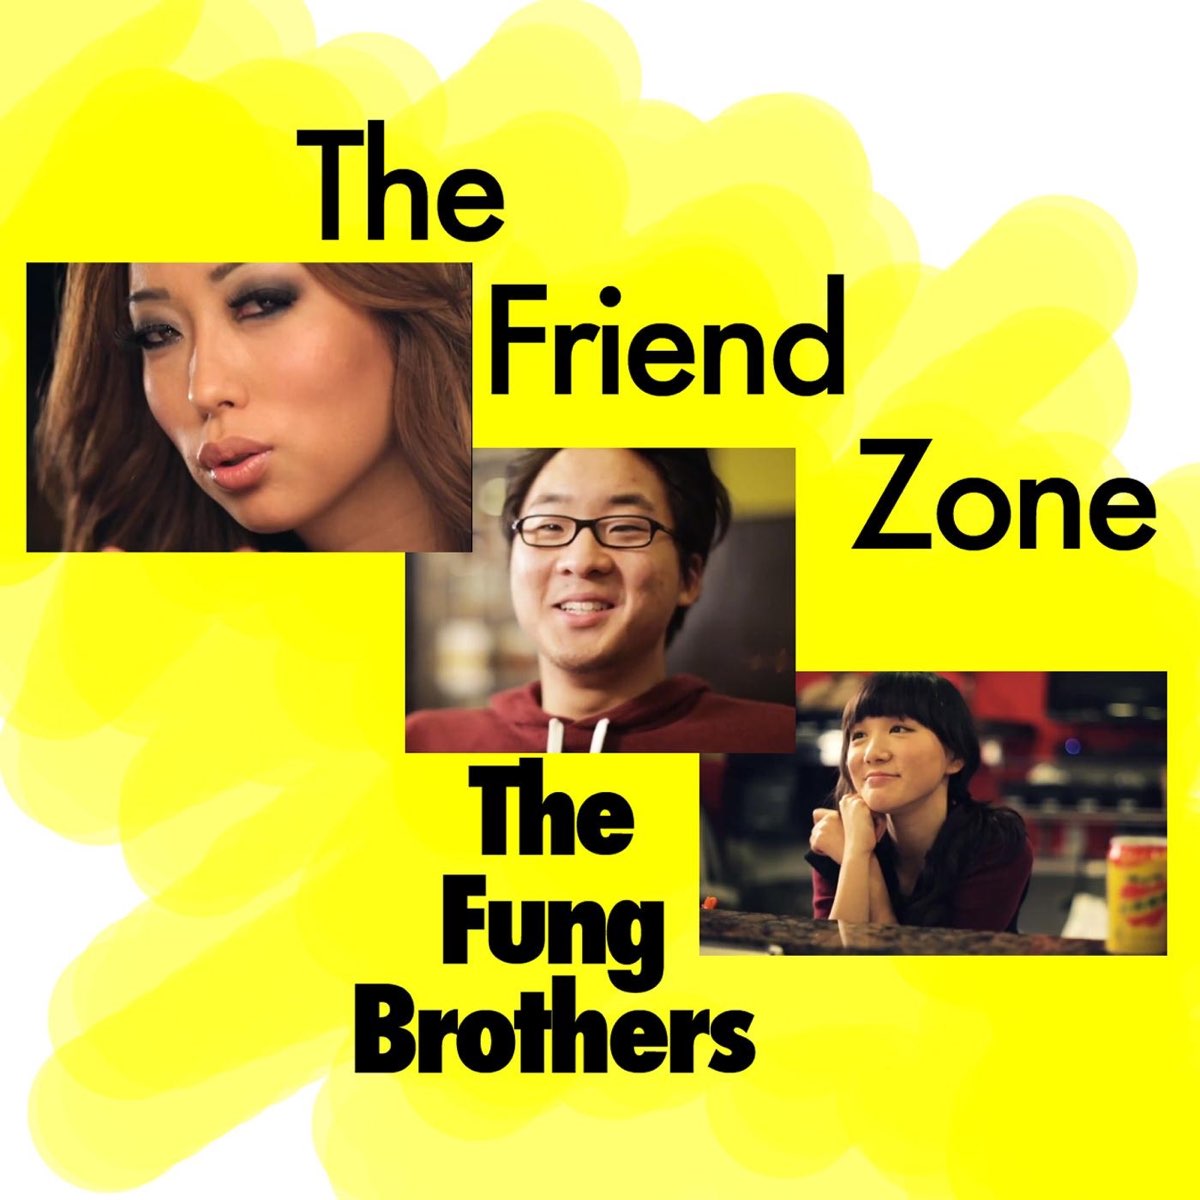 Friend Zone. Friend_zone80404. Friend Zone Music. Friend Zone konzlager. This is best song